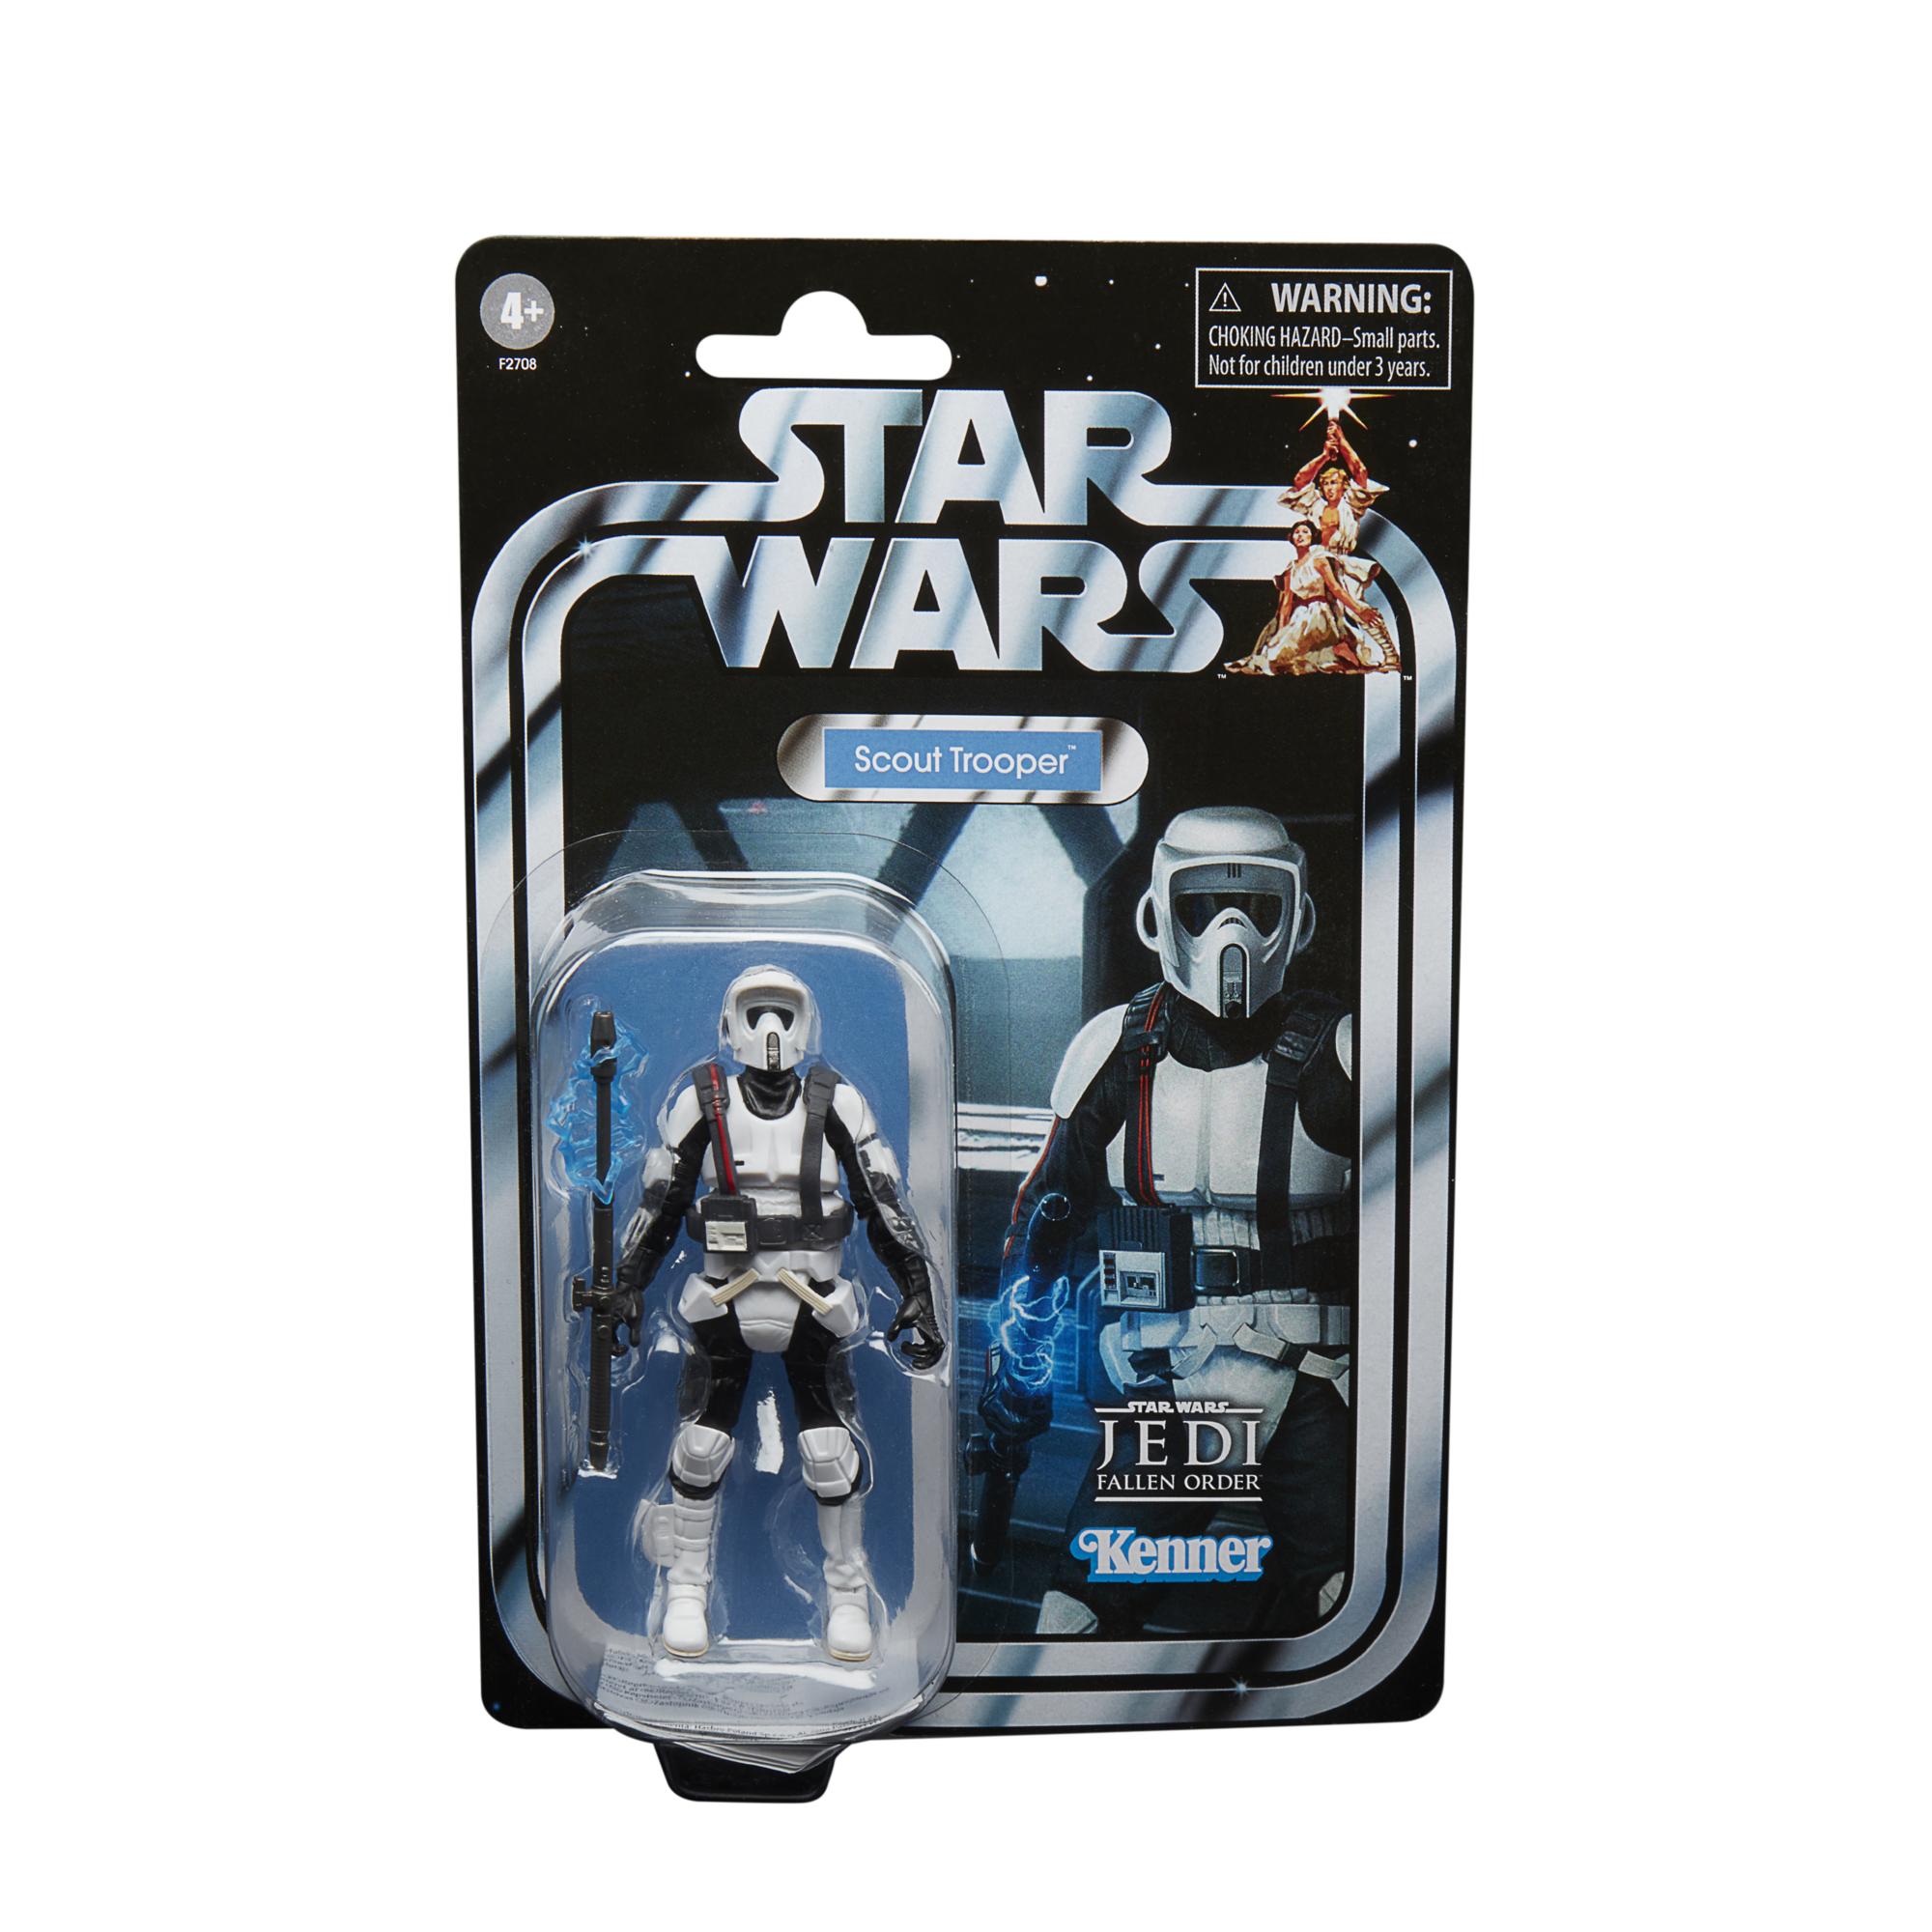 Star Wars The Vintage Collection Action Figure Exclusive Din Djarin Mandalorian) And Child